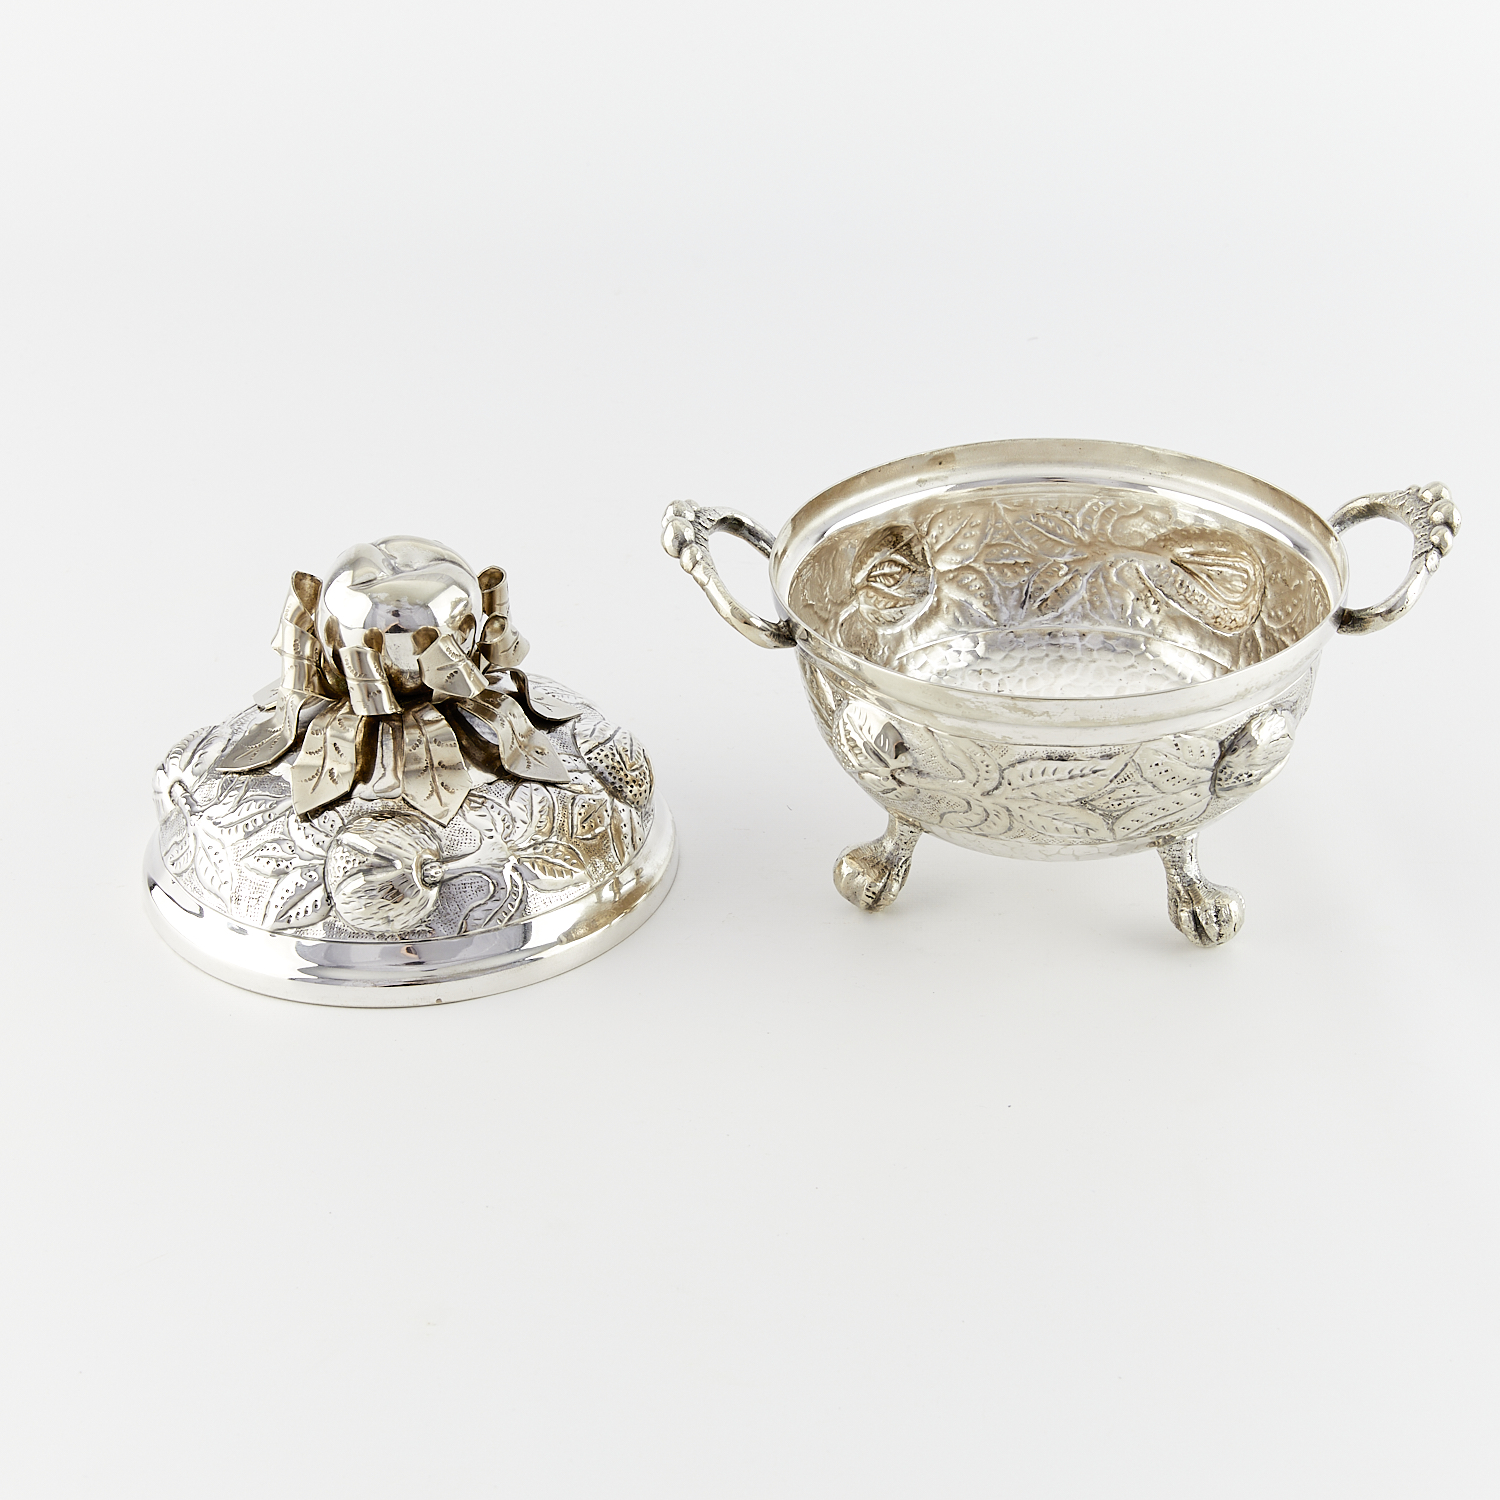 Bolivian Silverplate Covered Tripod Dish - Image 7 of 10